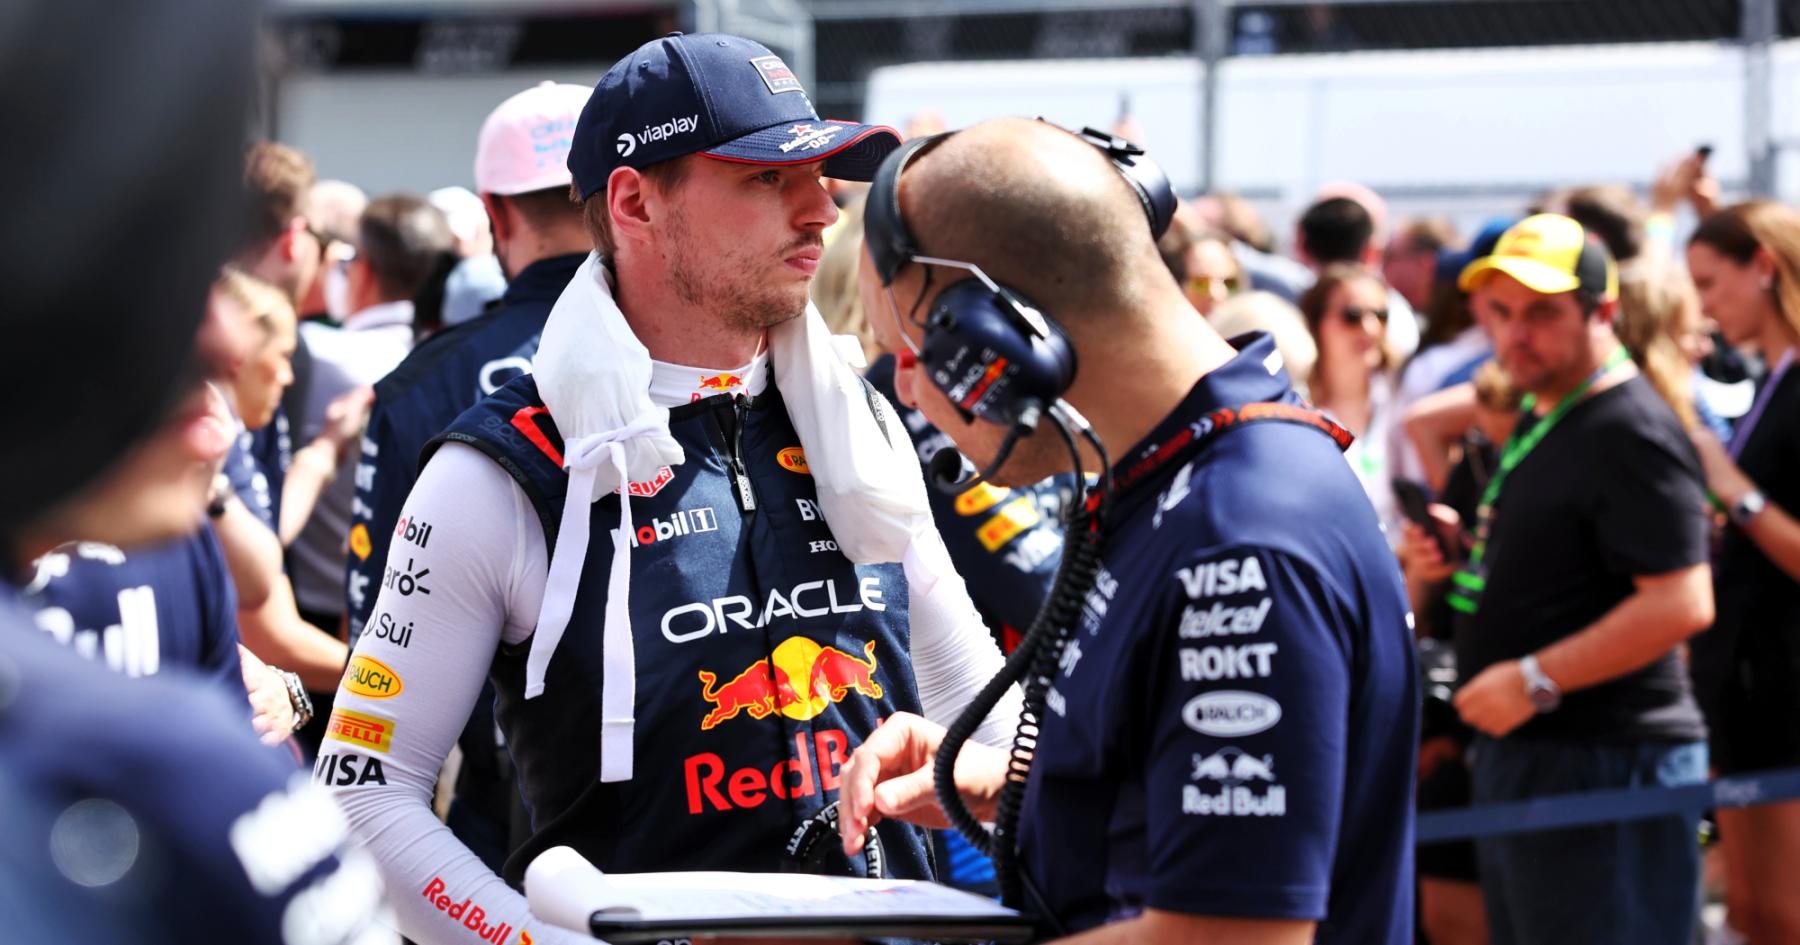 Verstappen Red Bull Departure Controversy - Szafnauer Questions Decision: Why Depart?